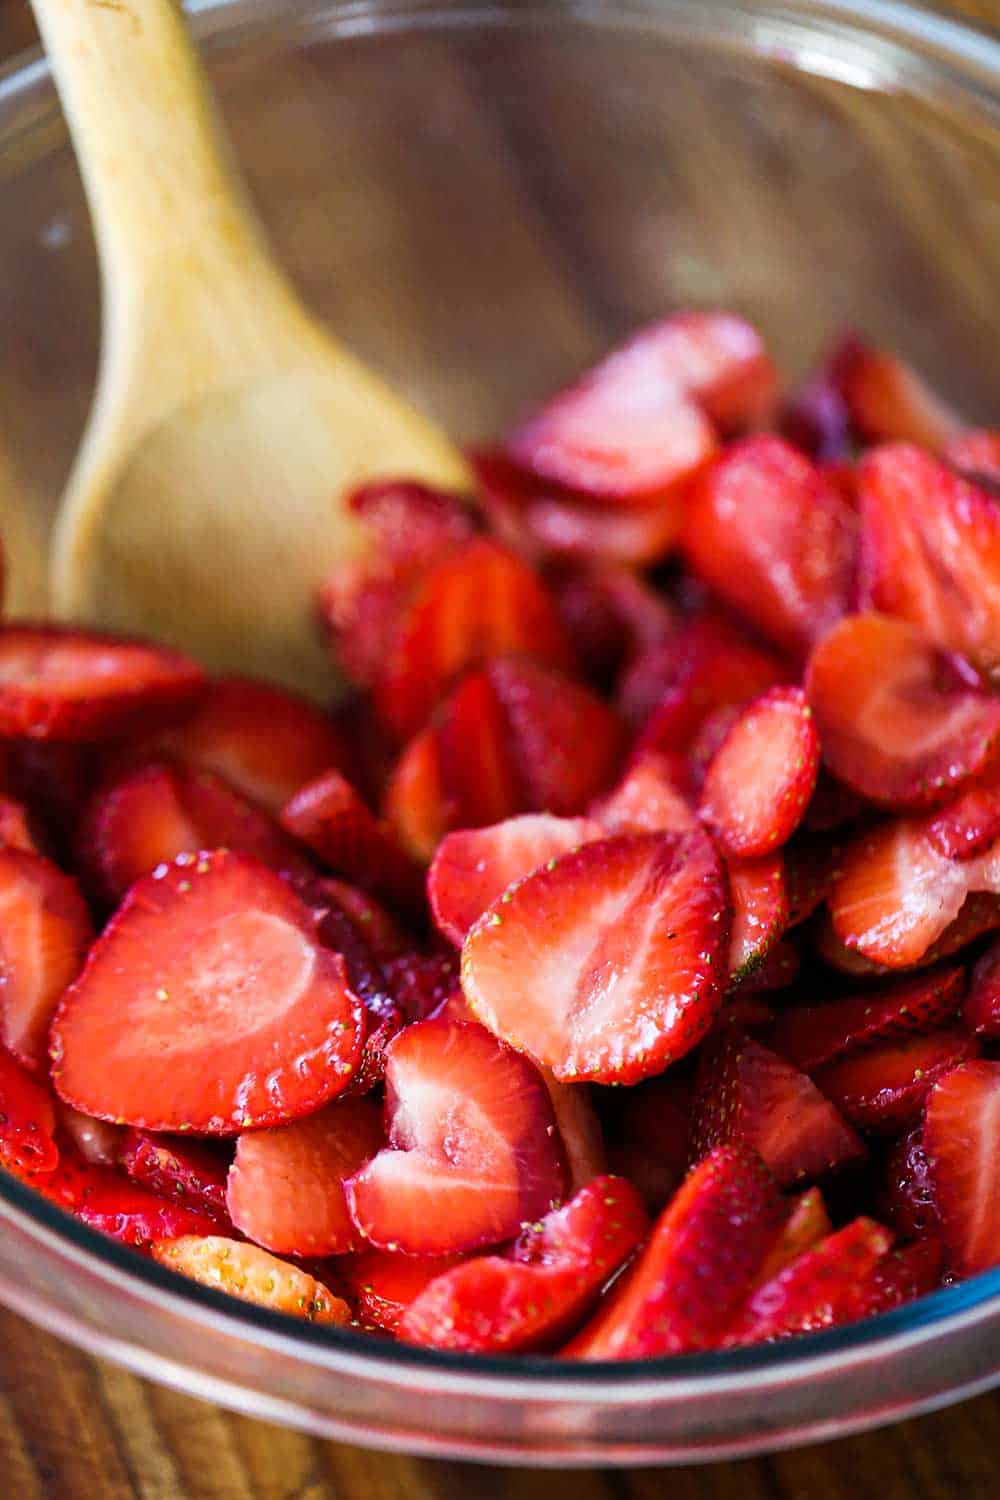 A large wooden spoon stirring sliced strawberries coated in sugar all in a large glass bowl.